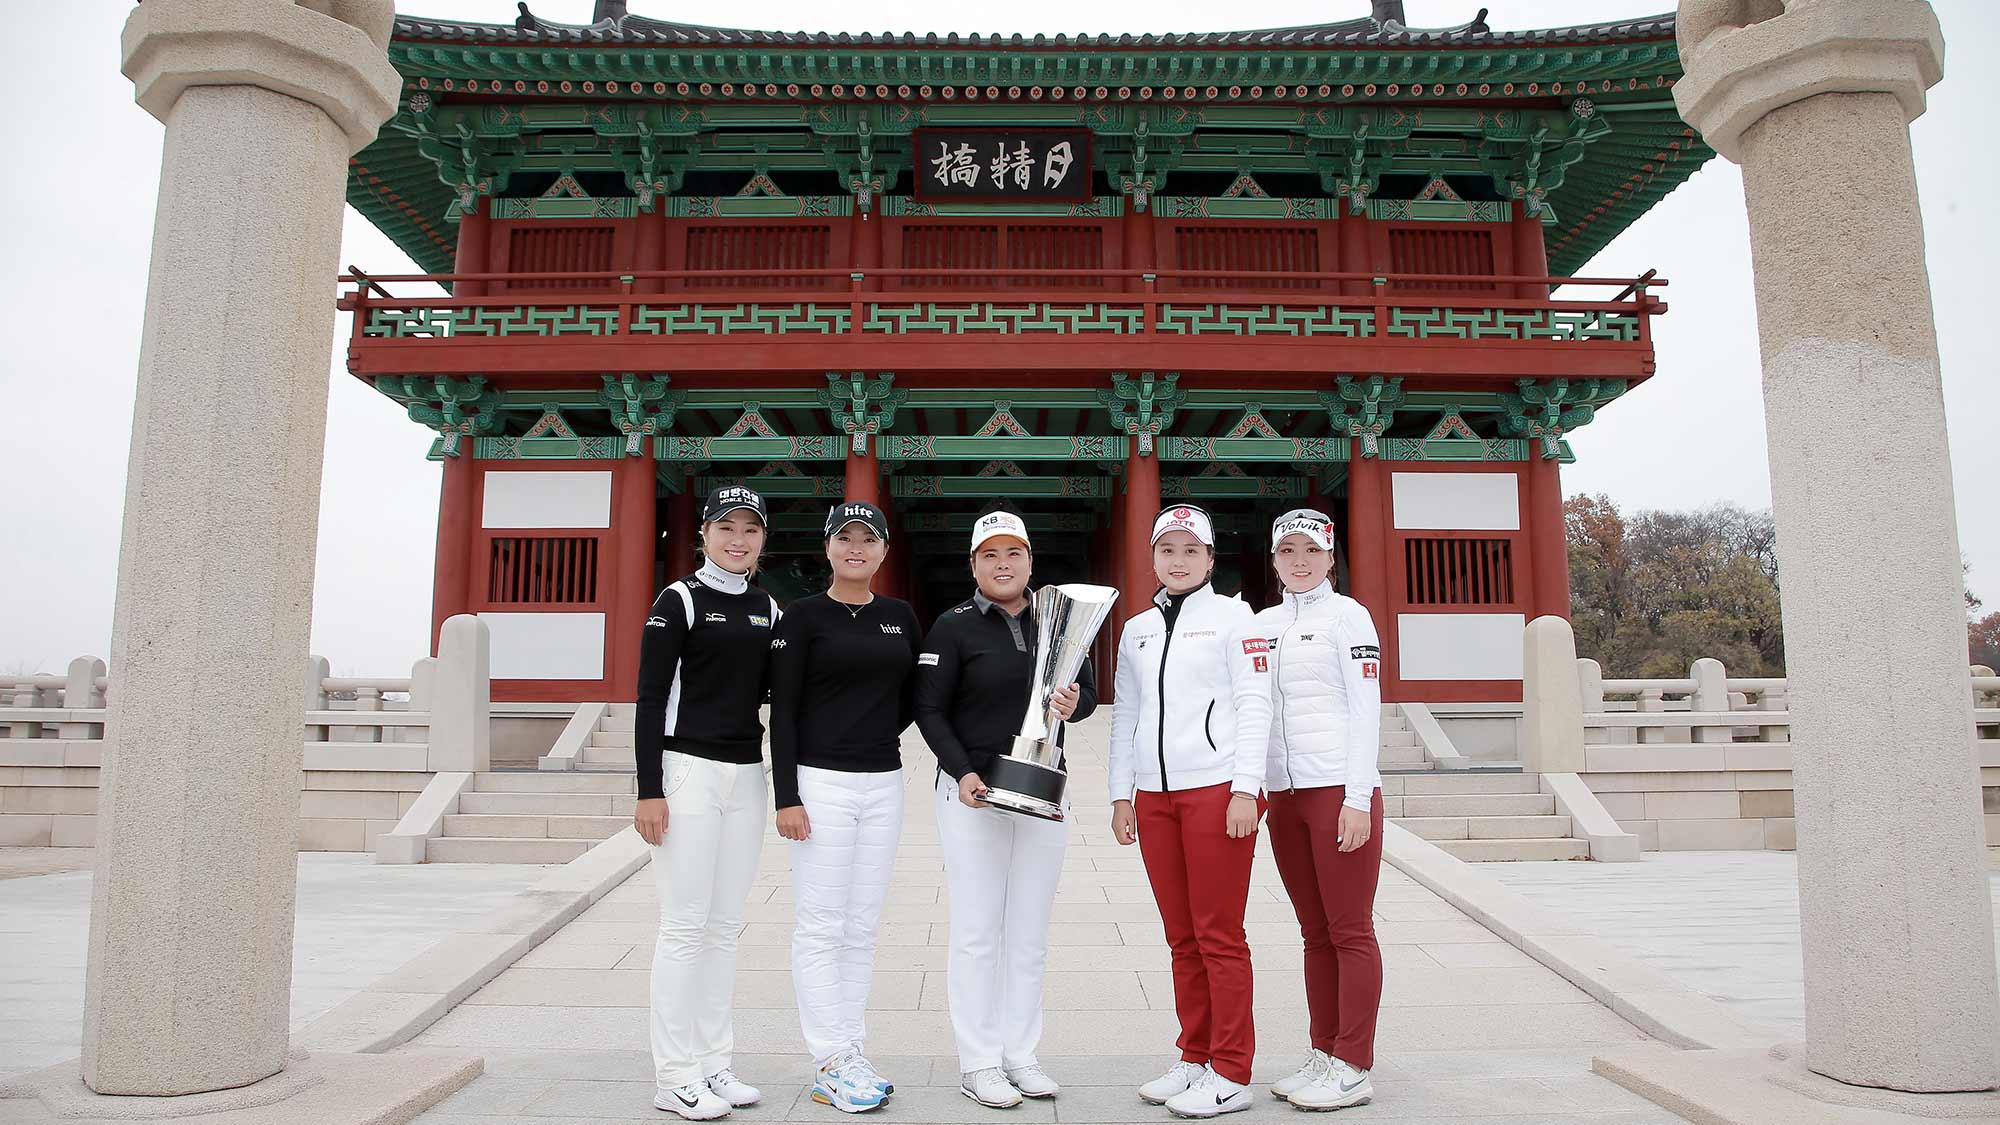 Jeongeun Lee6, Jin Young Ko, Inbee Park and members of the KLPGA pose for a photo during the Orange Life Champions Trophy Inbee Park Invitational at Blue One The Honors Country Club in Gyeongju, Republic of Korea